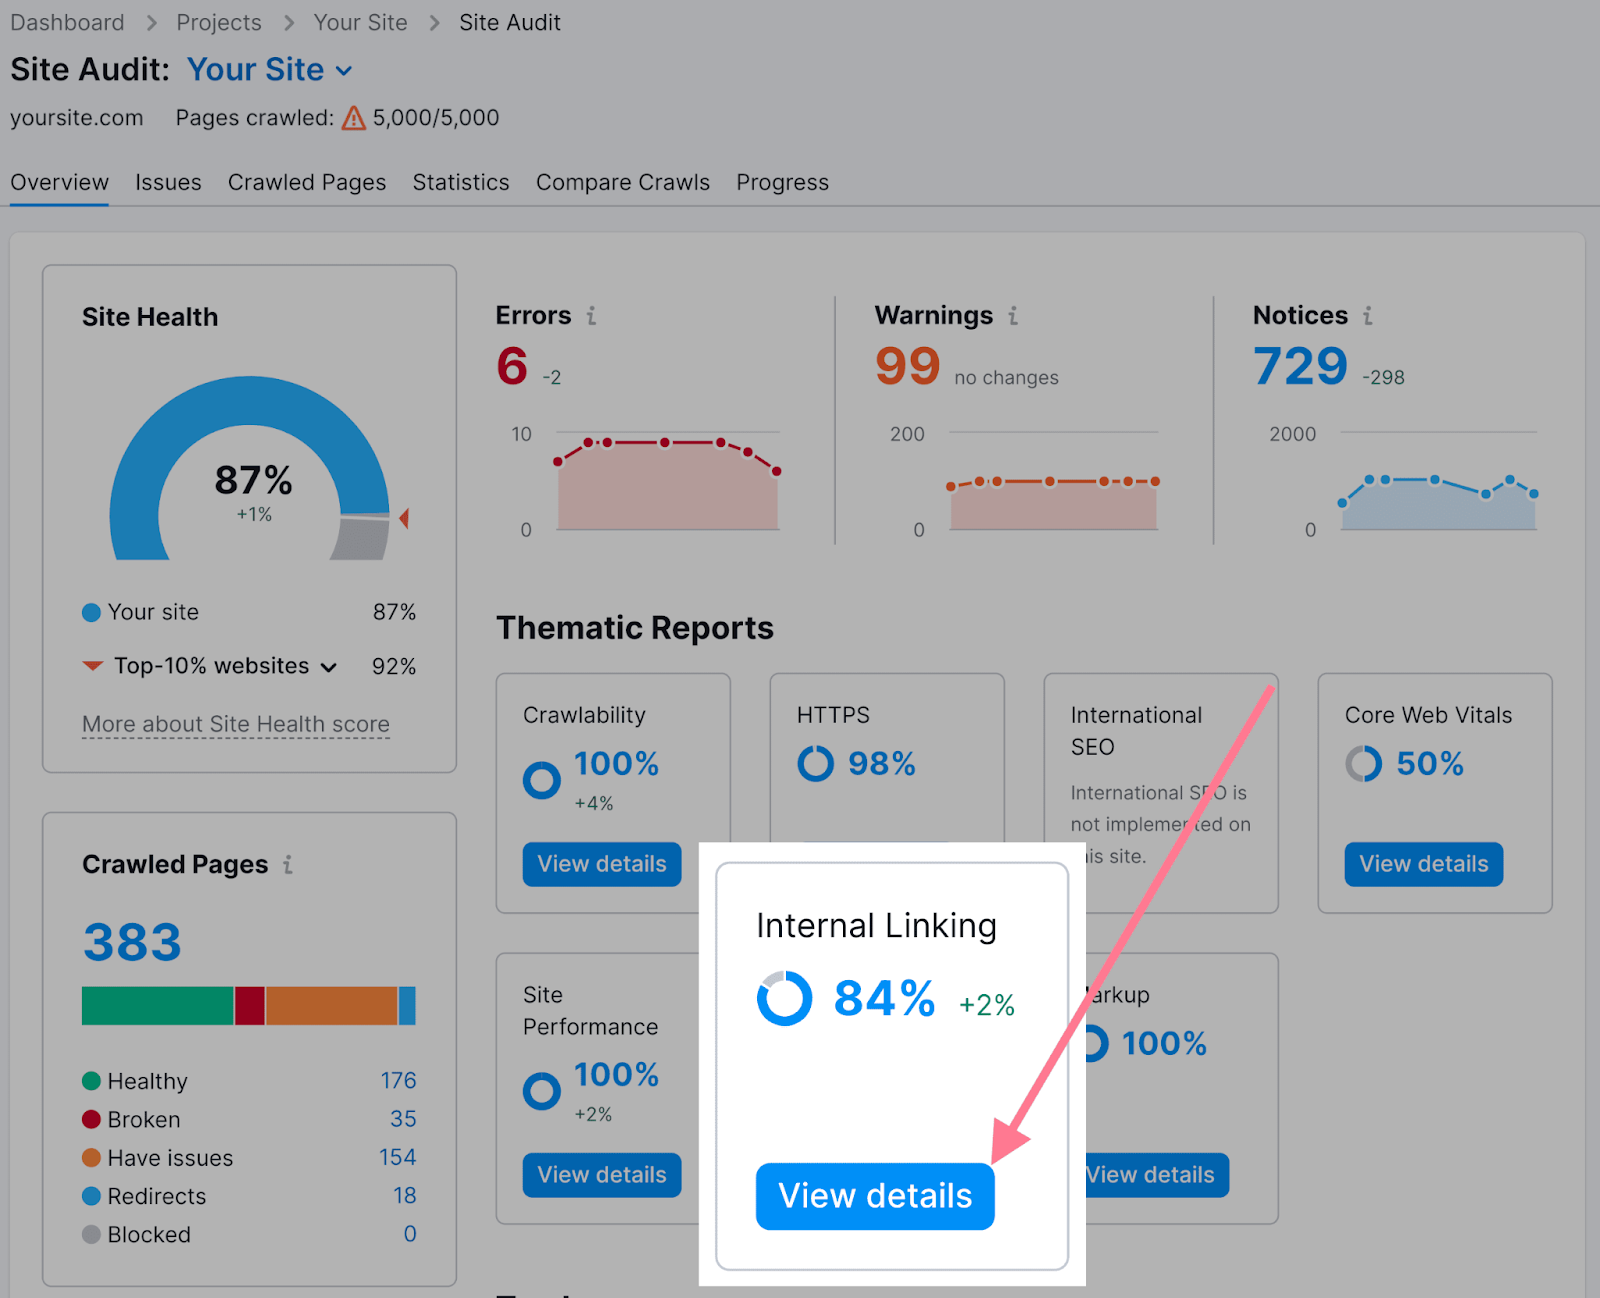 “Internal Linking" widget highlighted in the Site Audit's overview dashboard